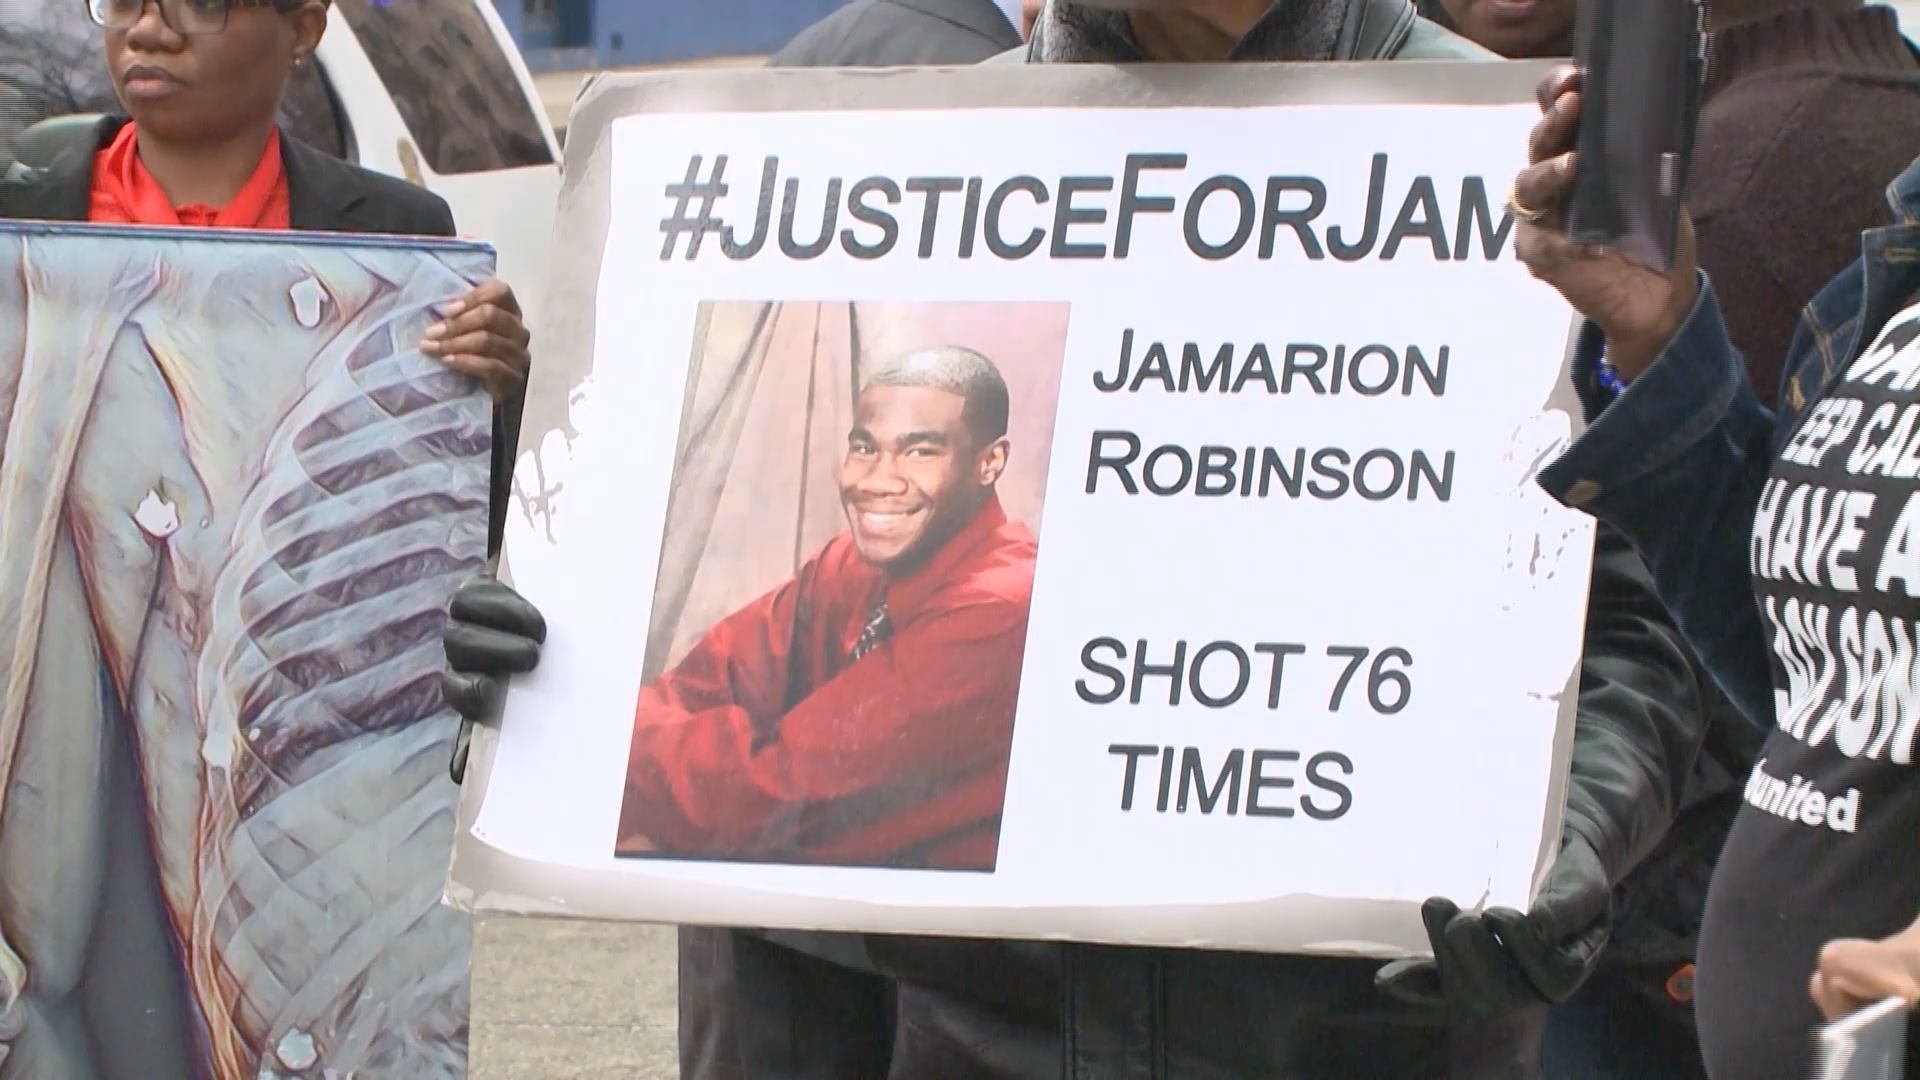 It's been three years since Jamarion Robinson was shot by police 59 times. District Attorney Paul Howard is fighting for answers about what happened, filling a lawsuit to get the US Marshals reports.